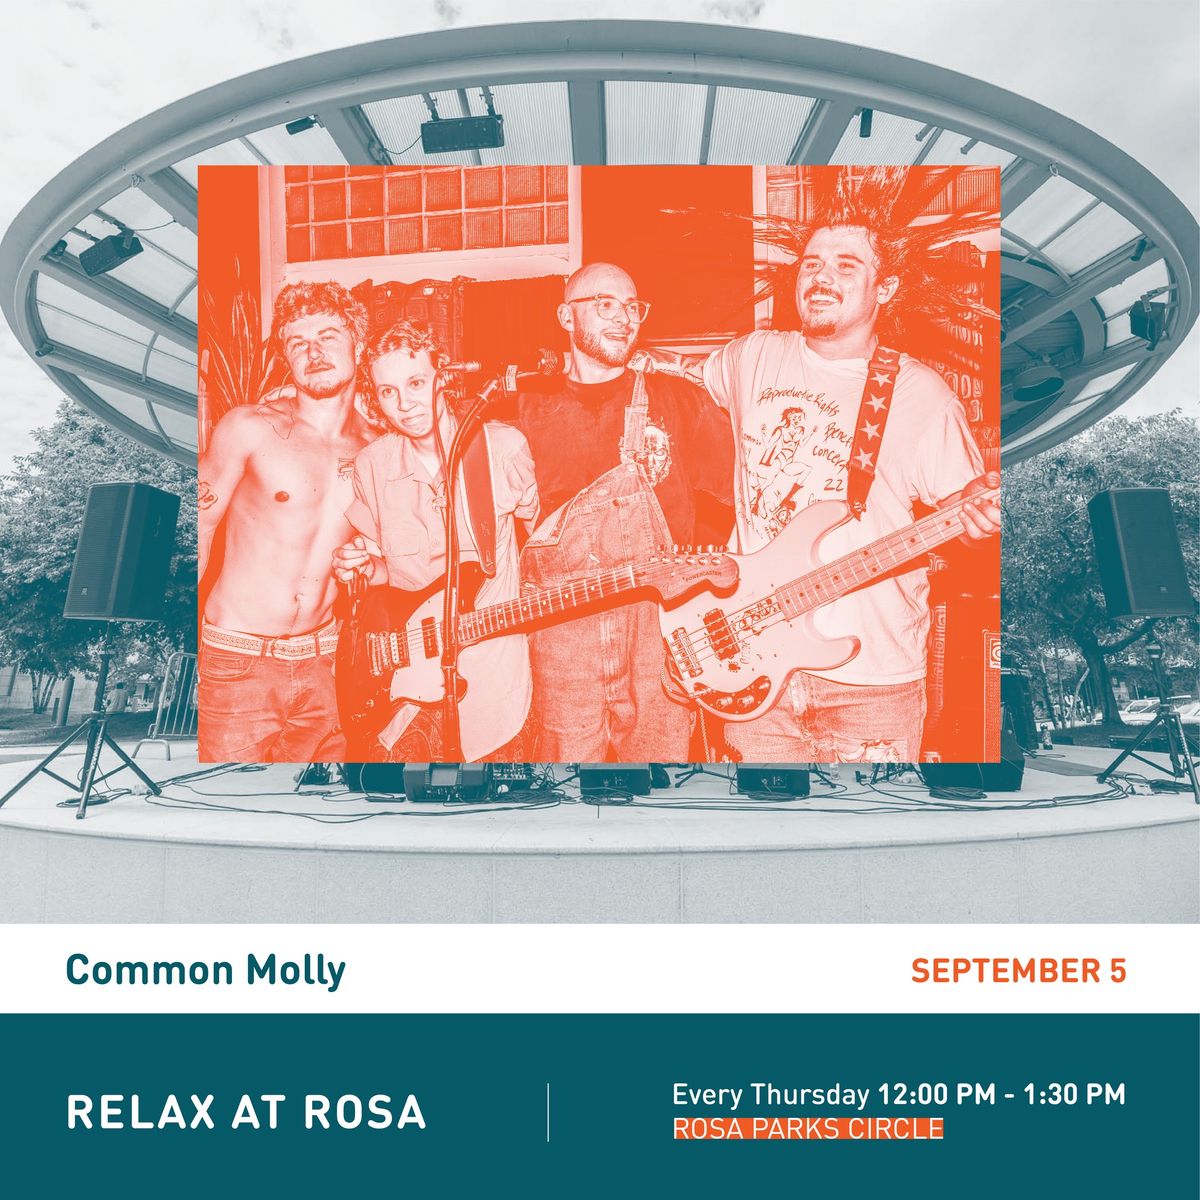 Relax at Rosa Concert Series | Common Molly 